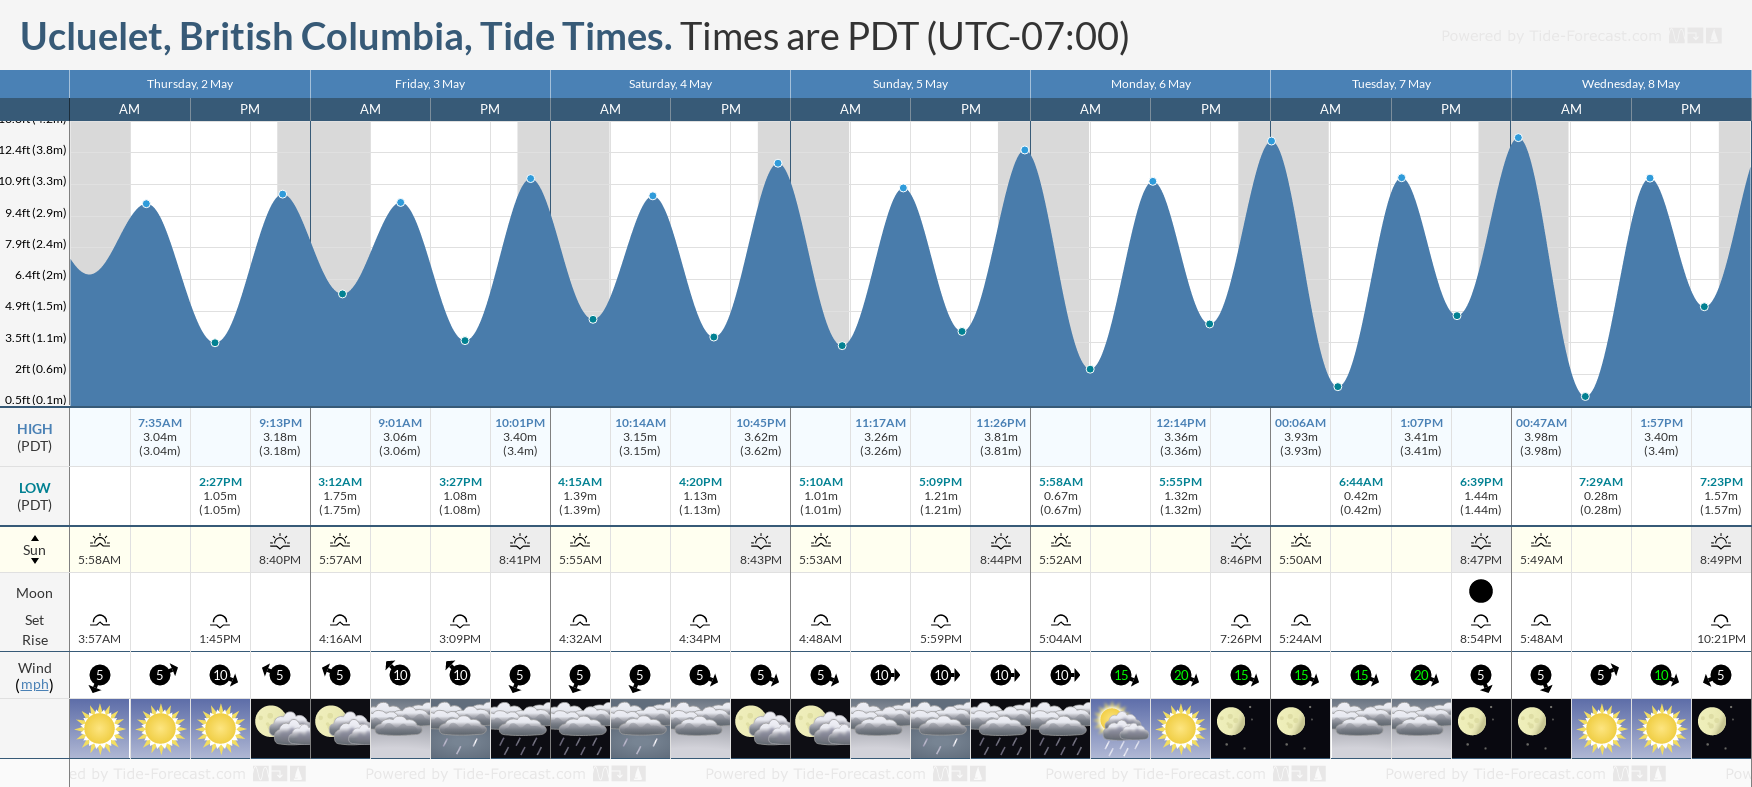 Ucluelet, British Columbia Tide Chart including high and low tide tide times for the next 7 days